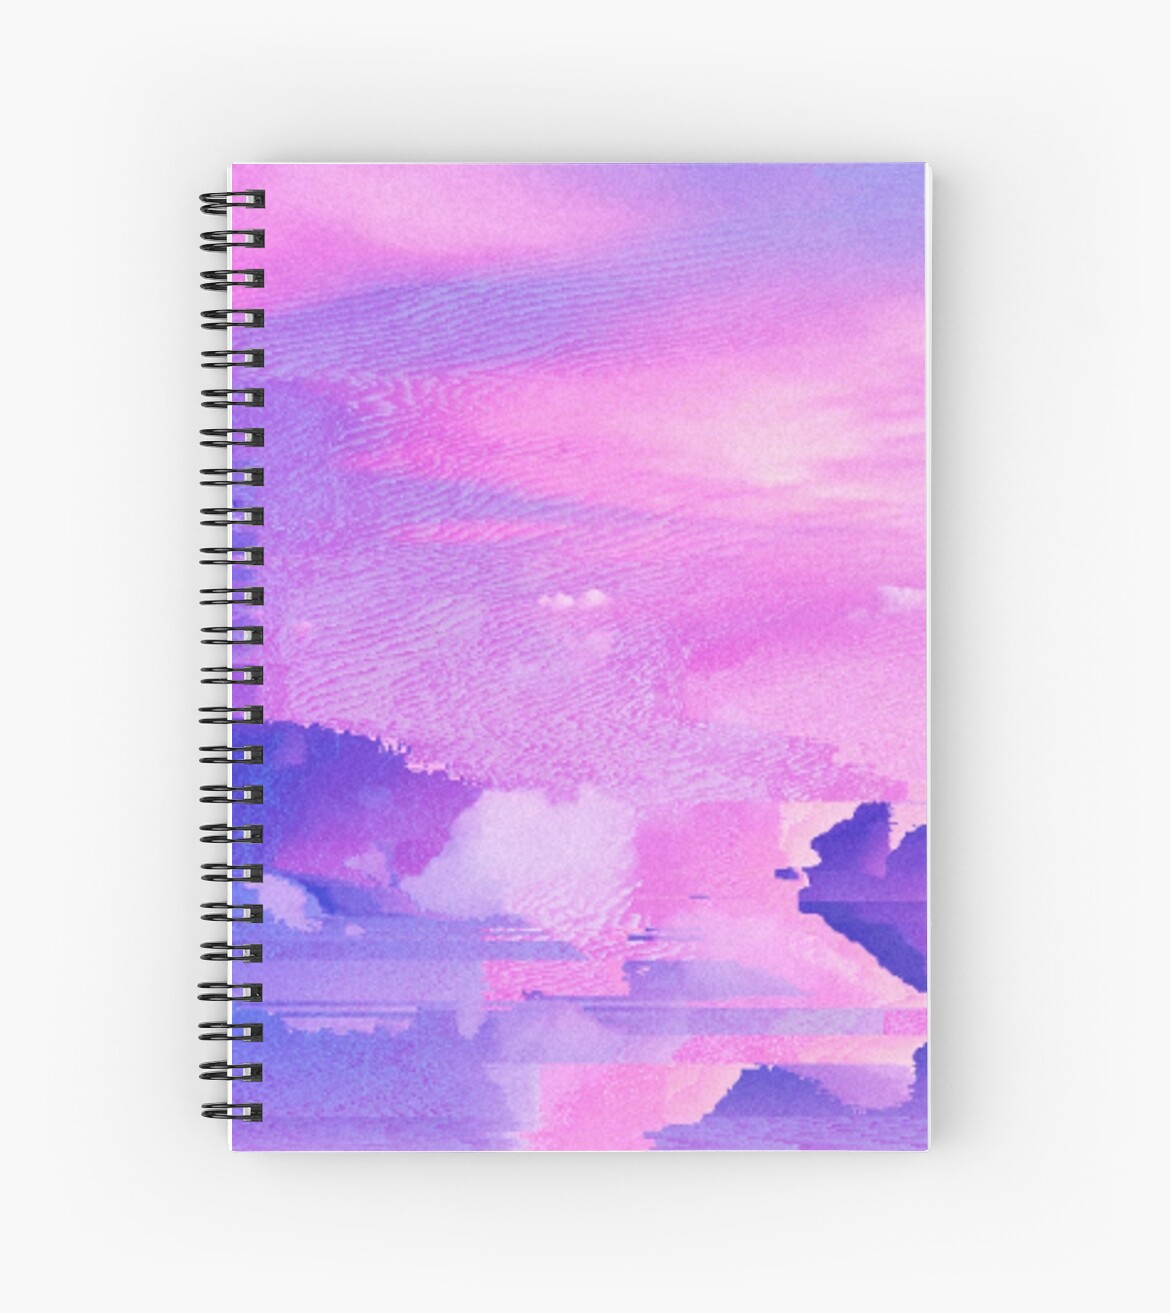 "Aesthetic Design 24" Spiral Notebooks by nietr Redbubble